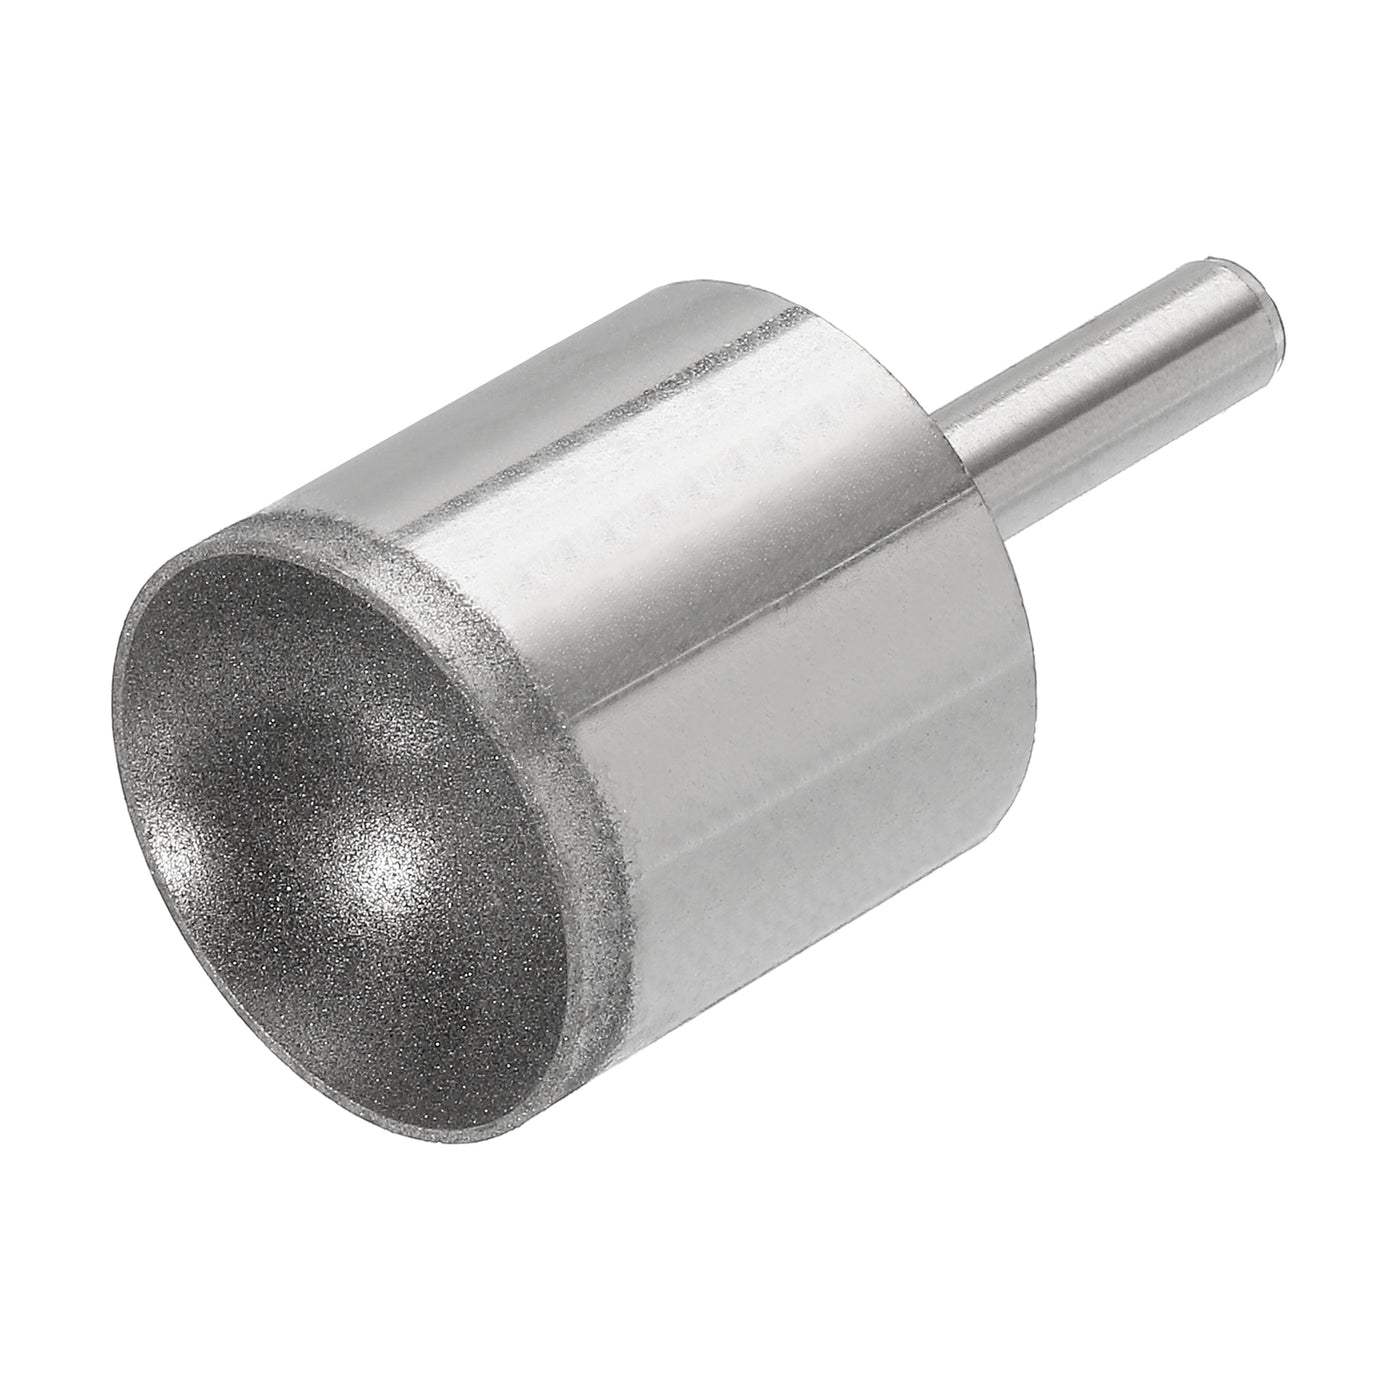 uxcell Uxcell 25mm 600 Grits Diamond Mounted Point Spherical Concave Head Bead Grinding Bit